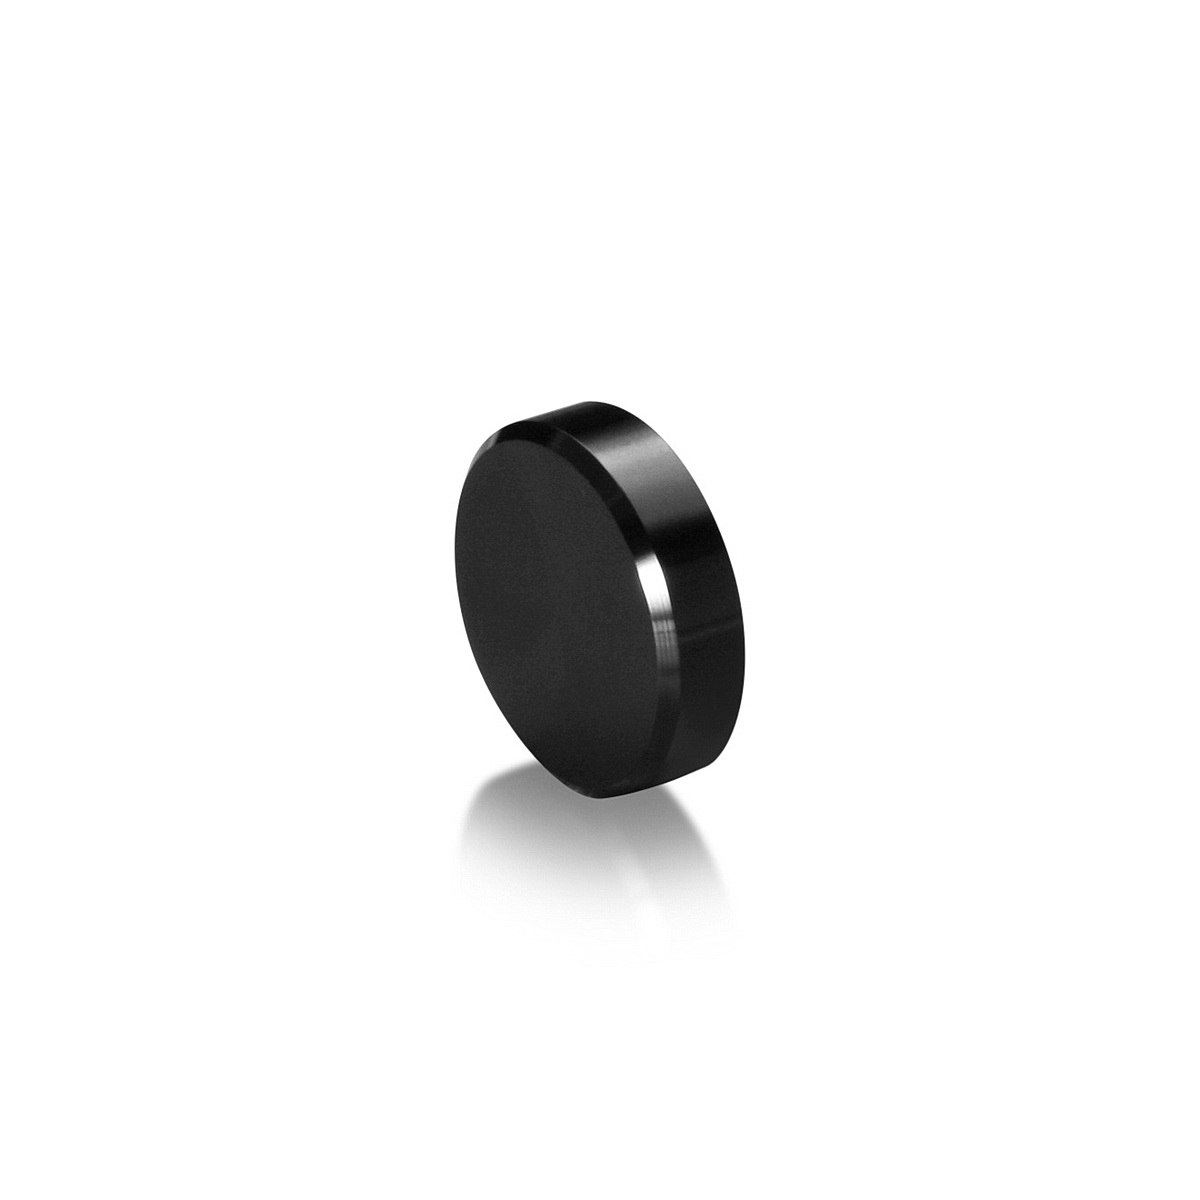 1/4-20 Threaded Caps Diameter: 1'', Height 1/4'', Black Anodized Aluminum [Required Material Hole Size: 5/16'']